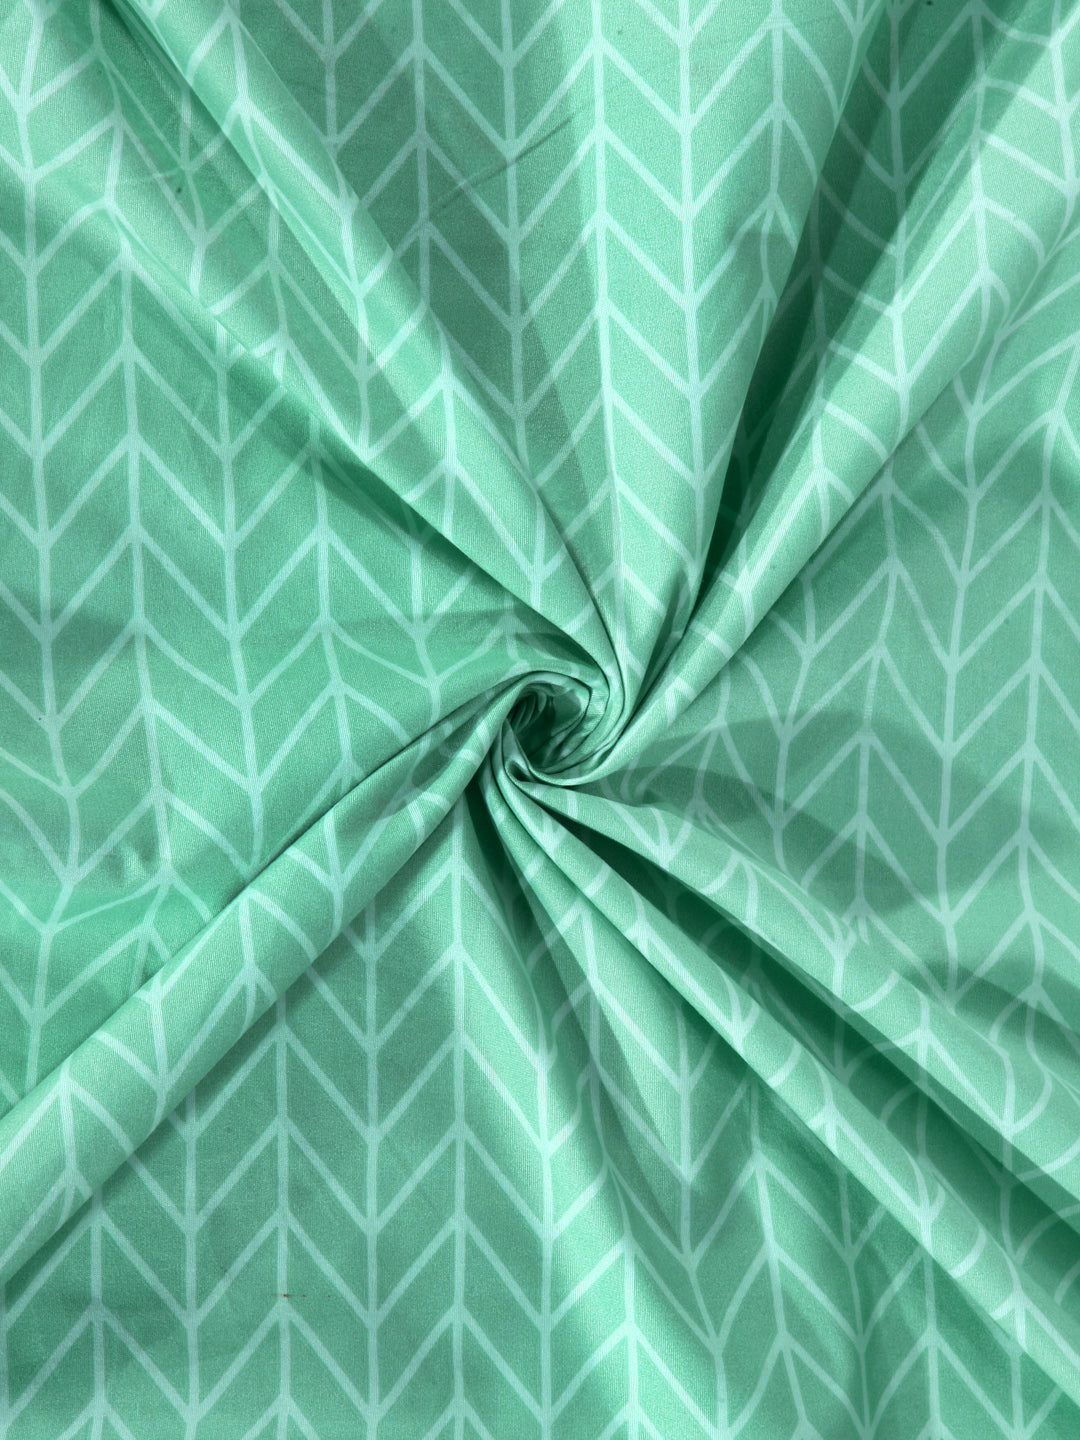 Arrabi Green Chevrons TC Cotton Blend Double Size Bedsheet with 2 Pillow Covers